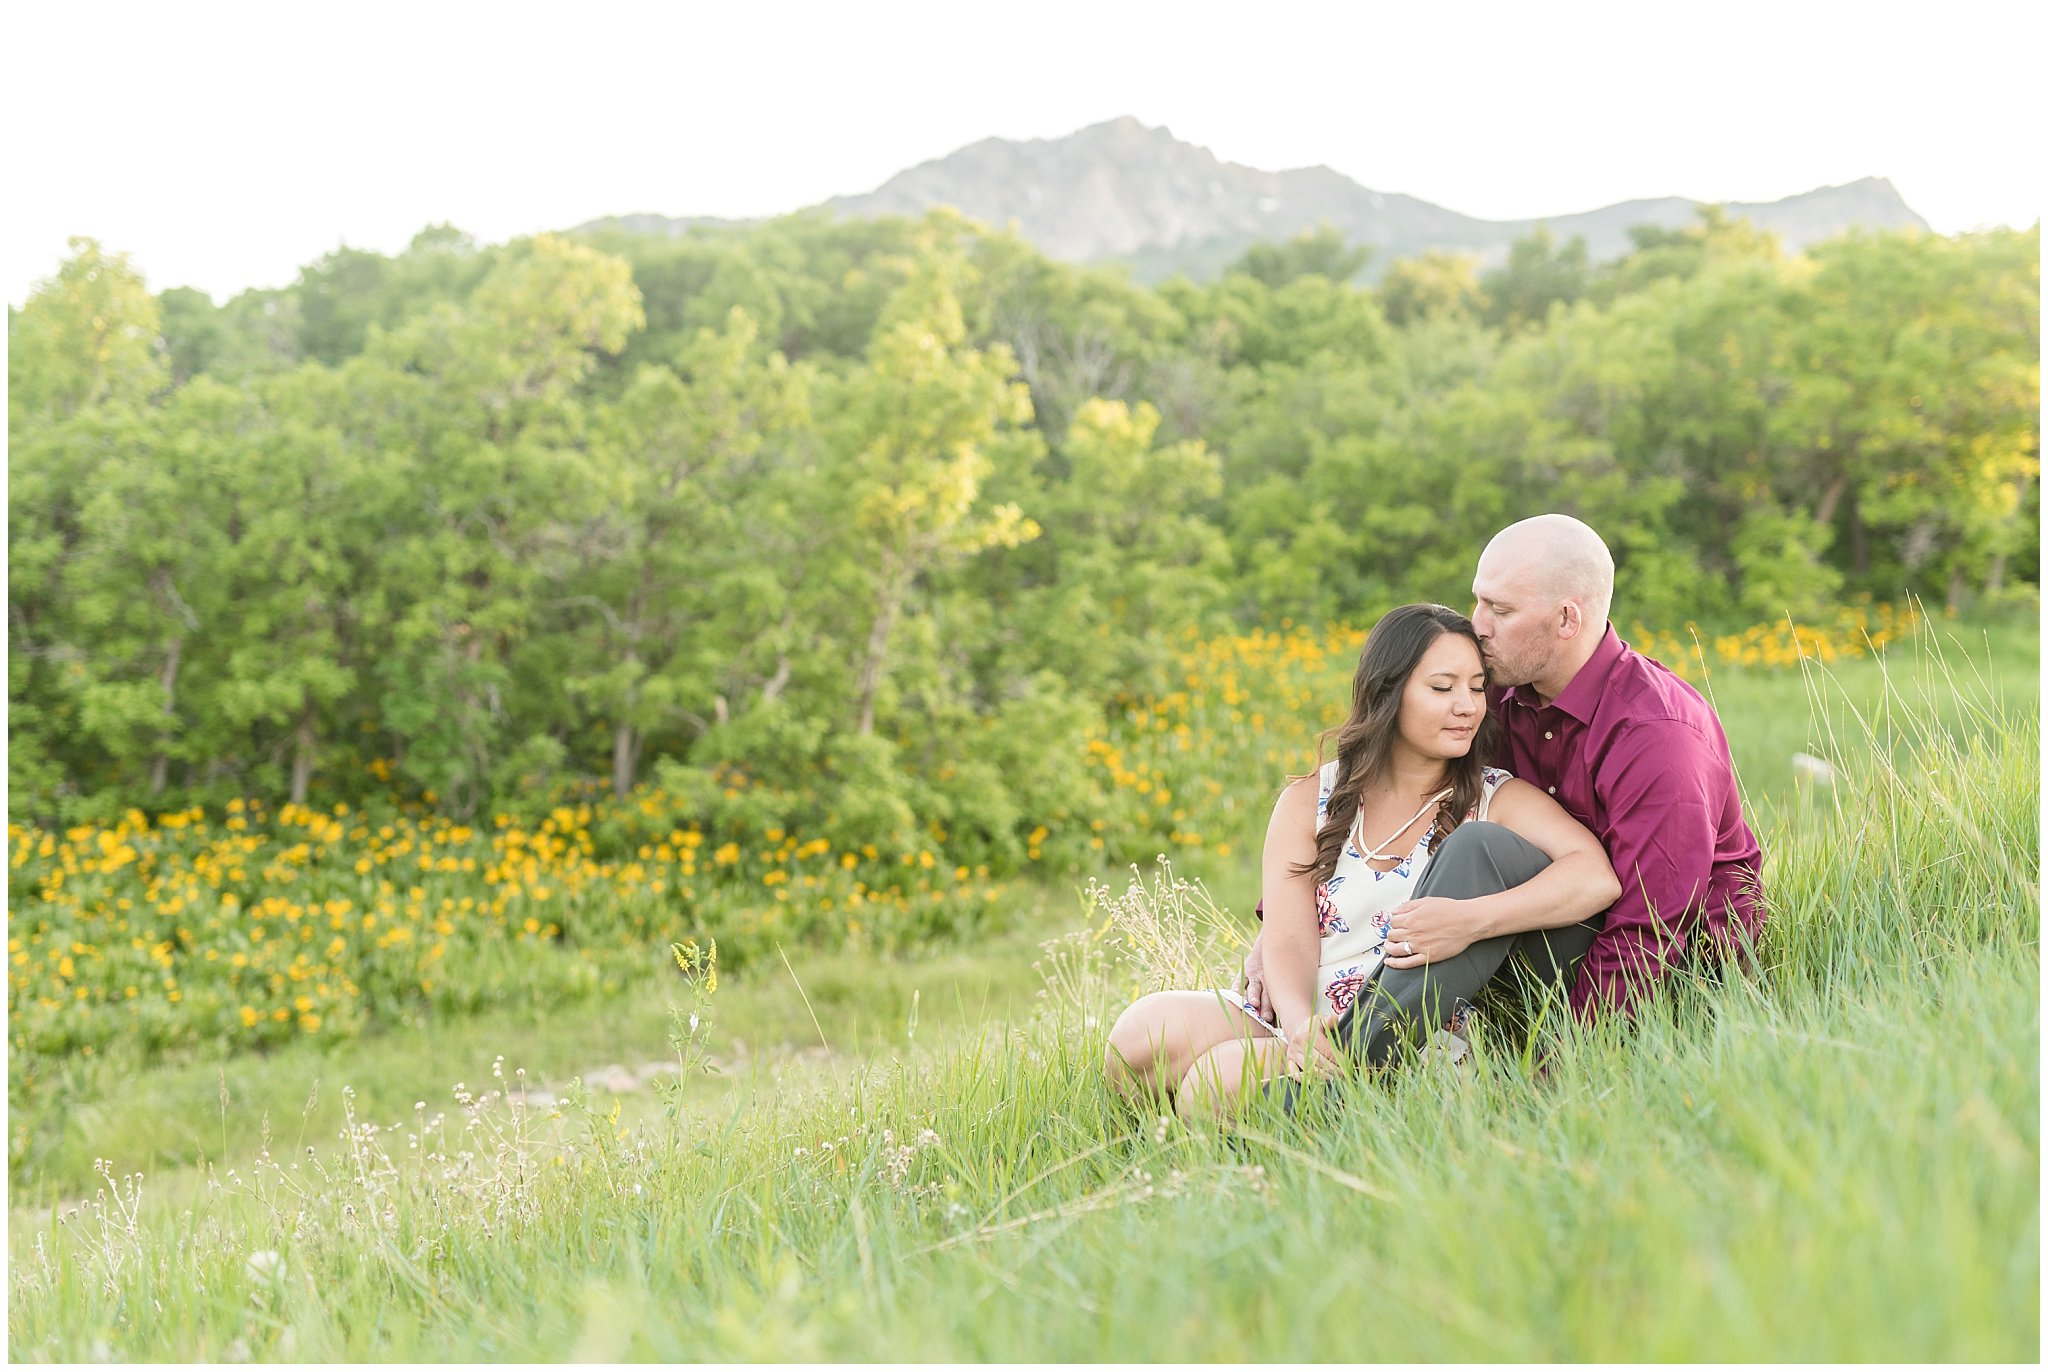 Engagement session with mountains in the background and wildflowers | Snowbasin Utah Engagements